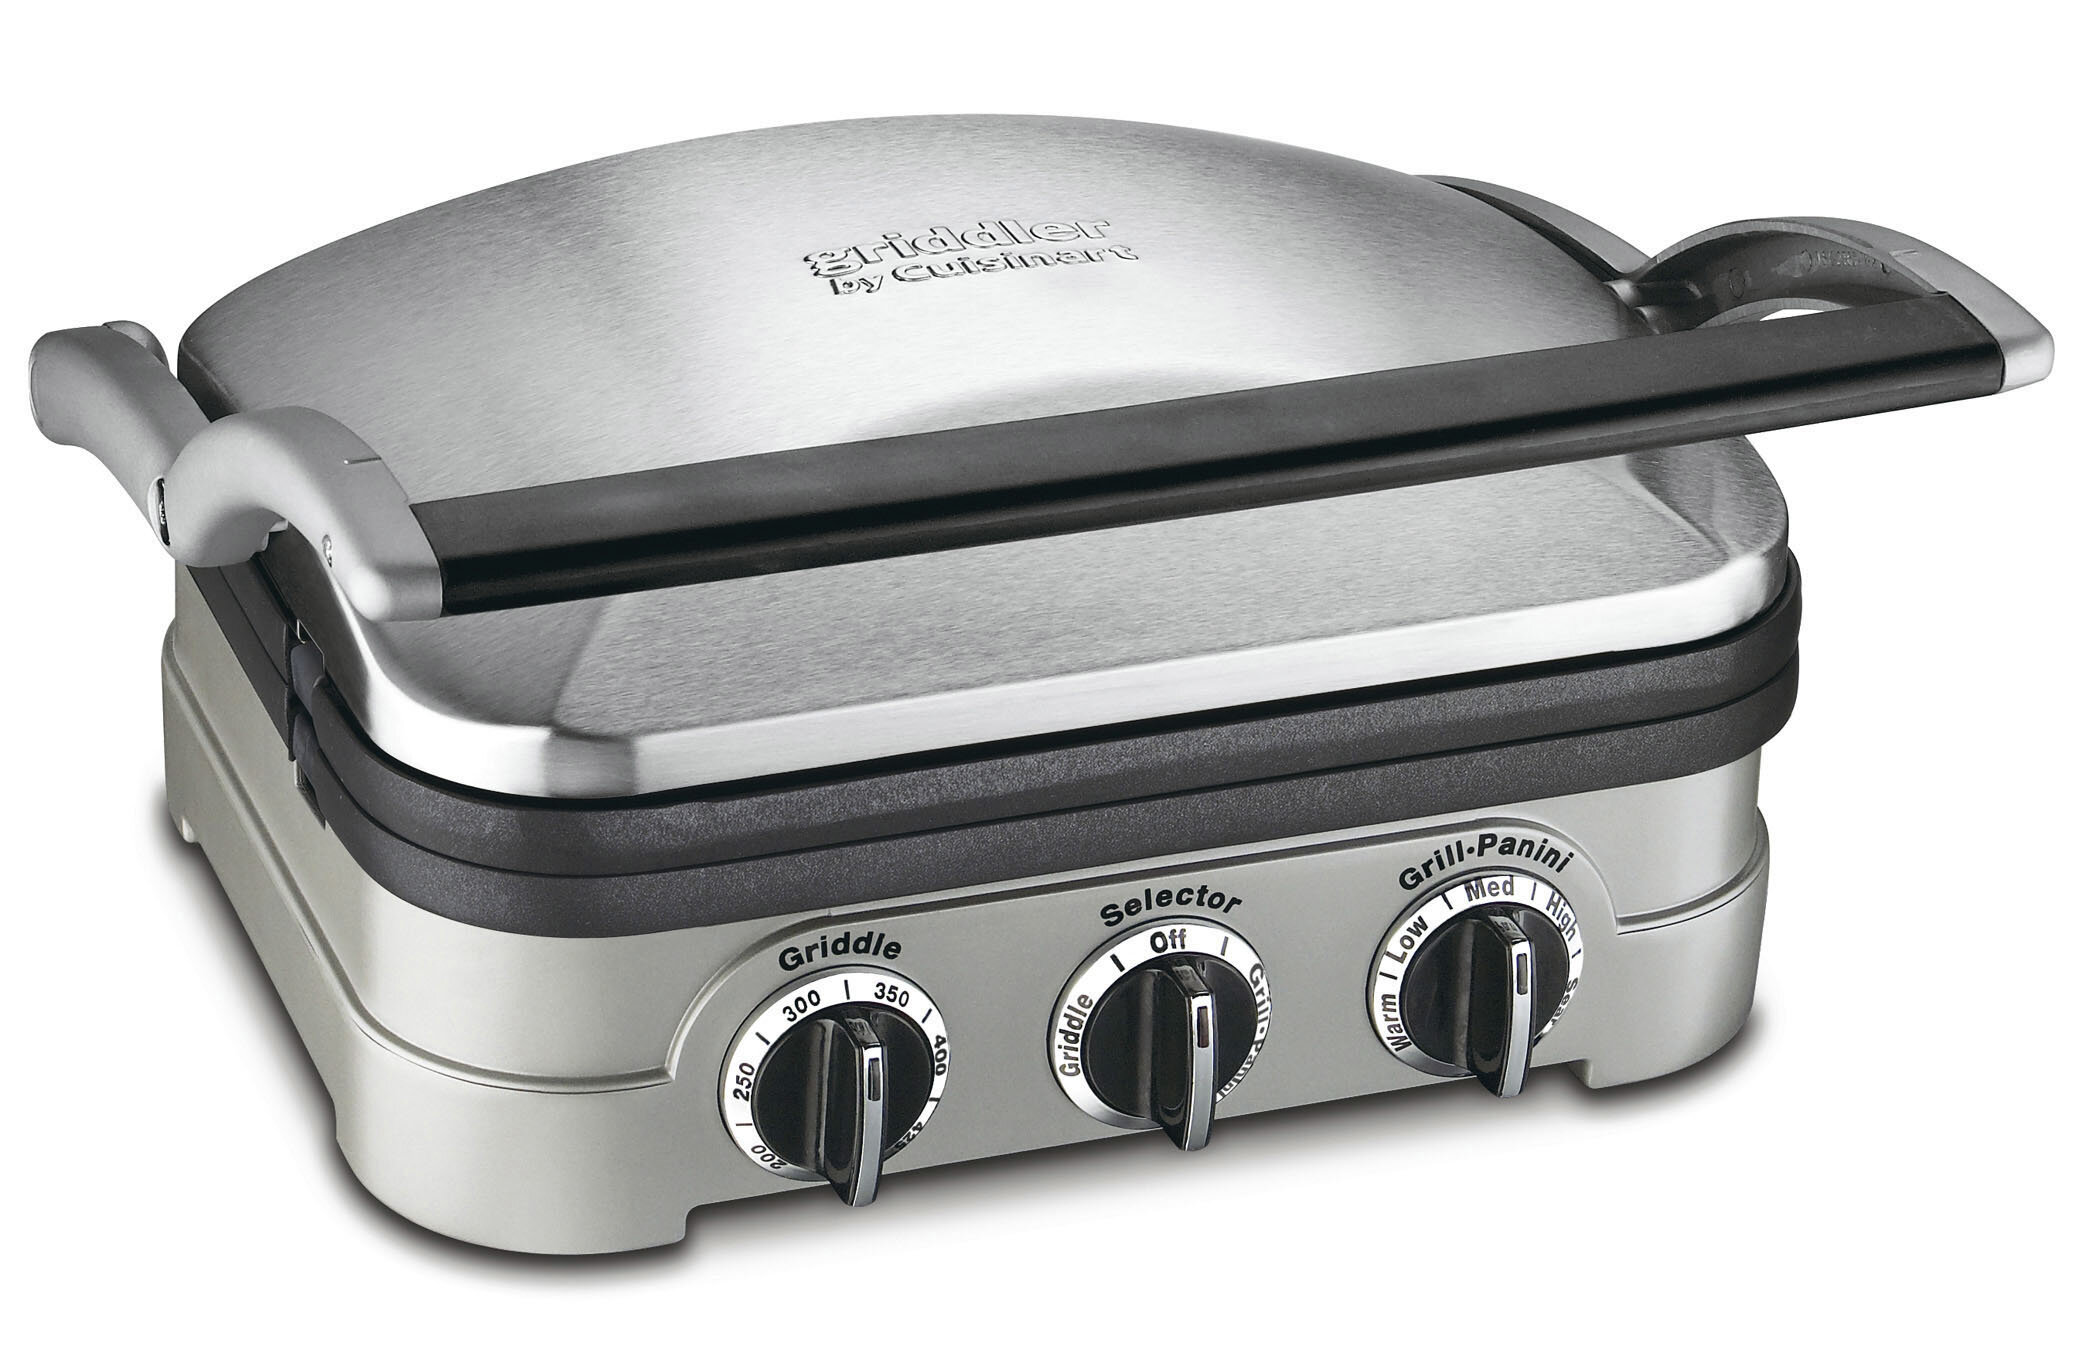 Cuisinart Series Griddler Five Multi-Purpose Contact Grill, Silver